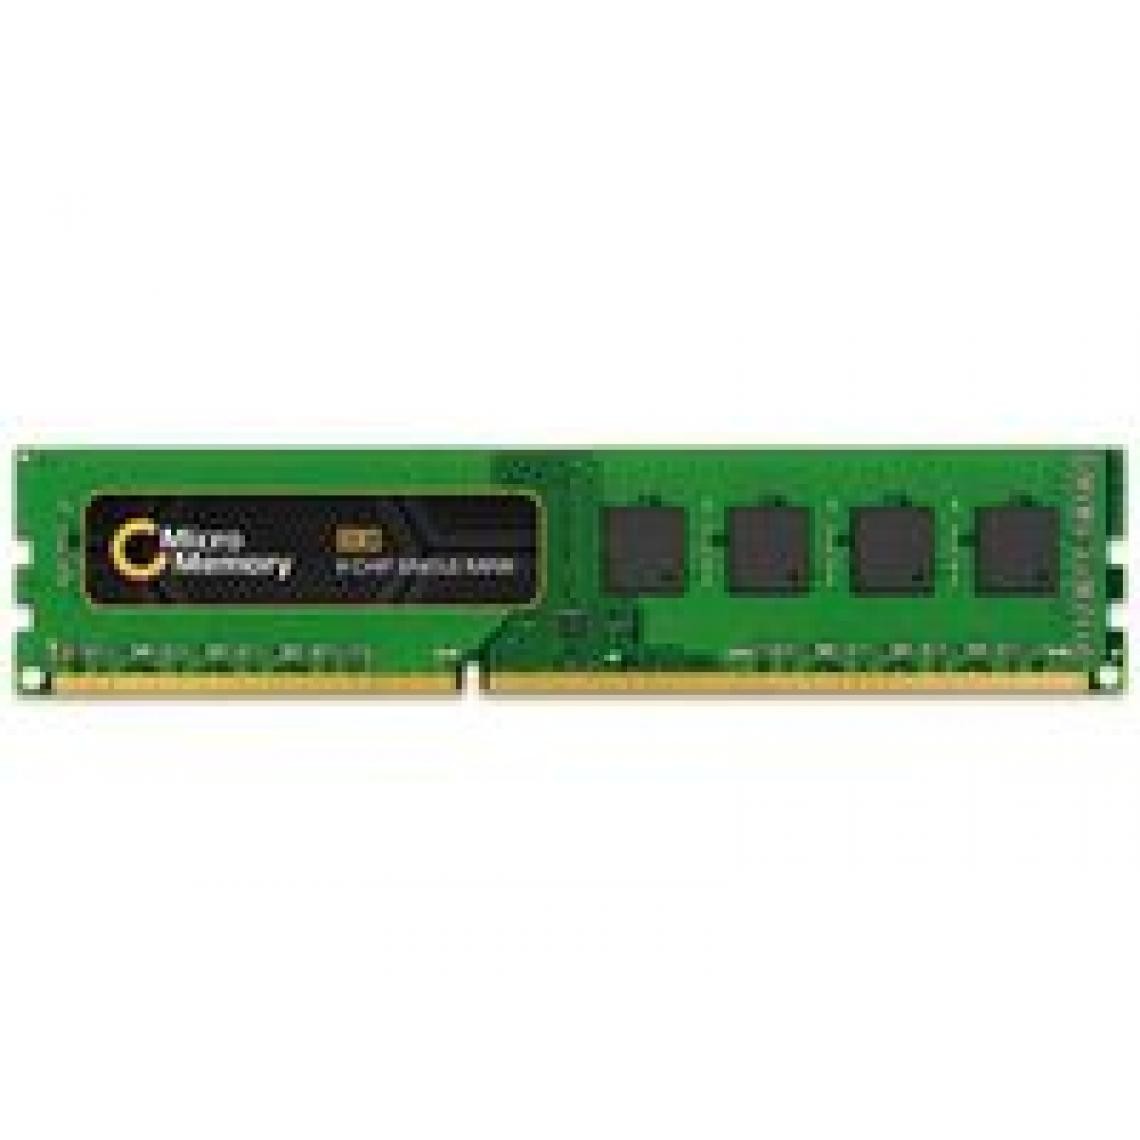 Because Music - 8GB DDR3 1600MHz PC3-12800 1x8GB memory module A6994446 - RAM PC Fixe